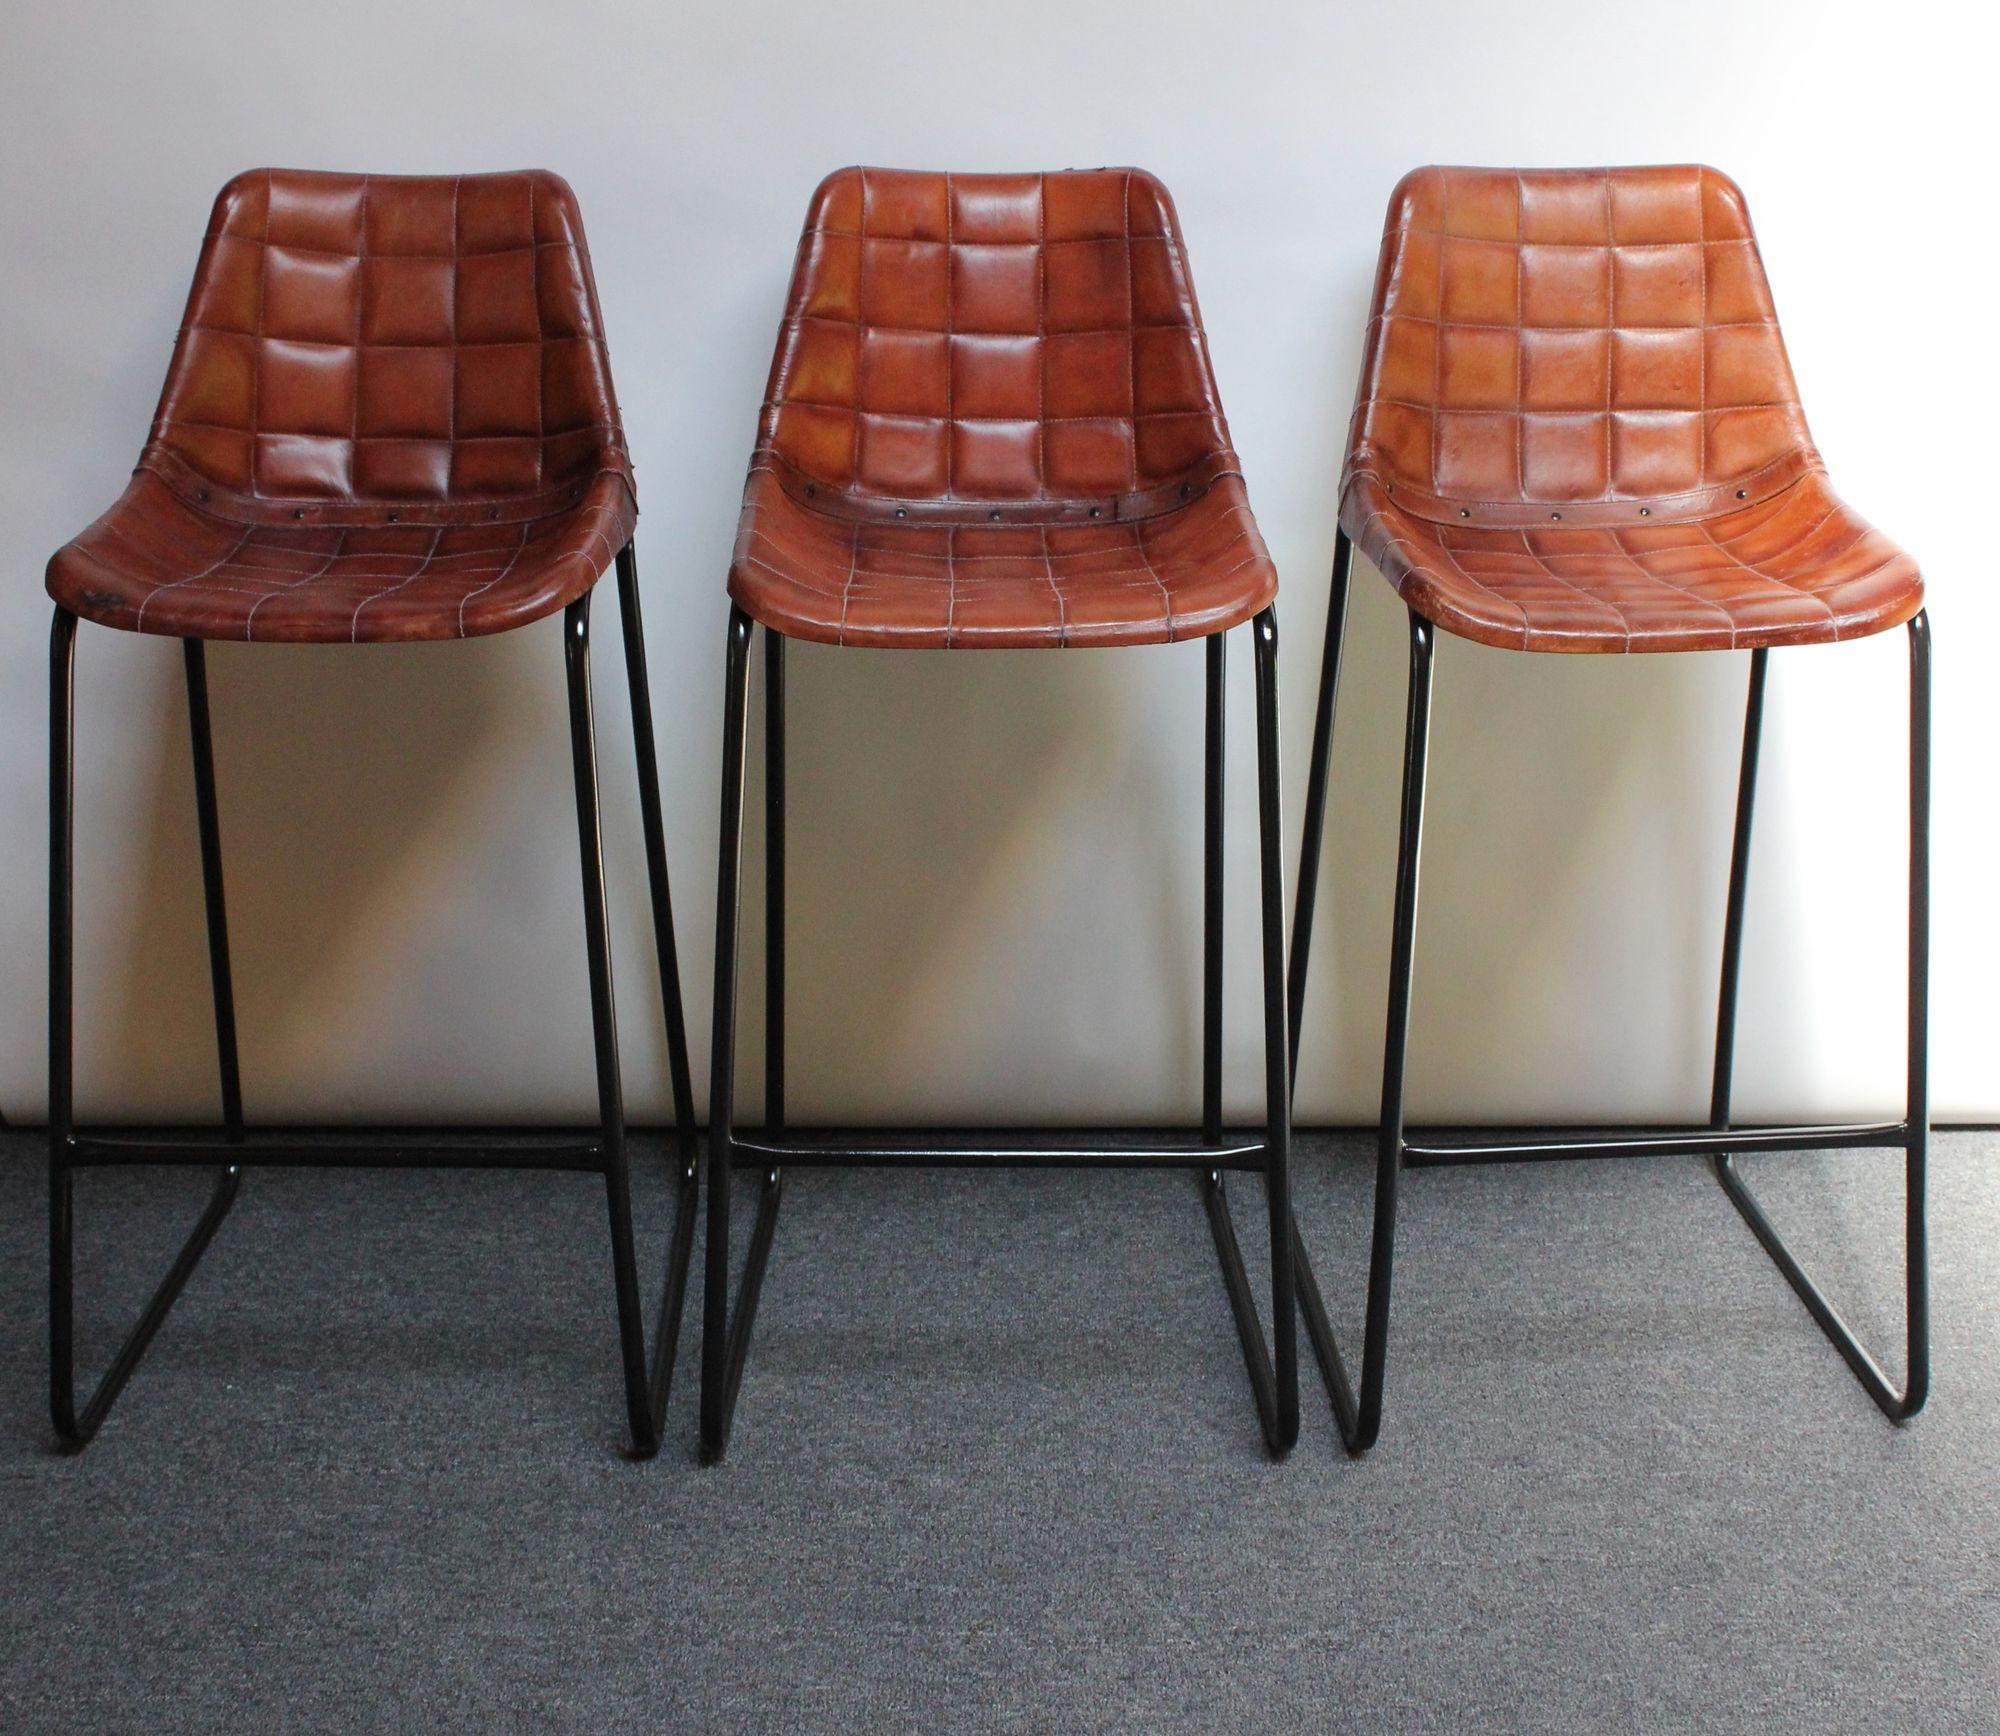 Set of three richly patinated barstools with leatherette seats supported by wrought iron and steel frames with footrests (ca. 1970s, Italy).
Though the maker is unknown, contemporary adaptations of these stools have been made within the last several